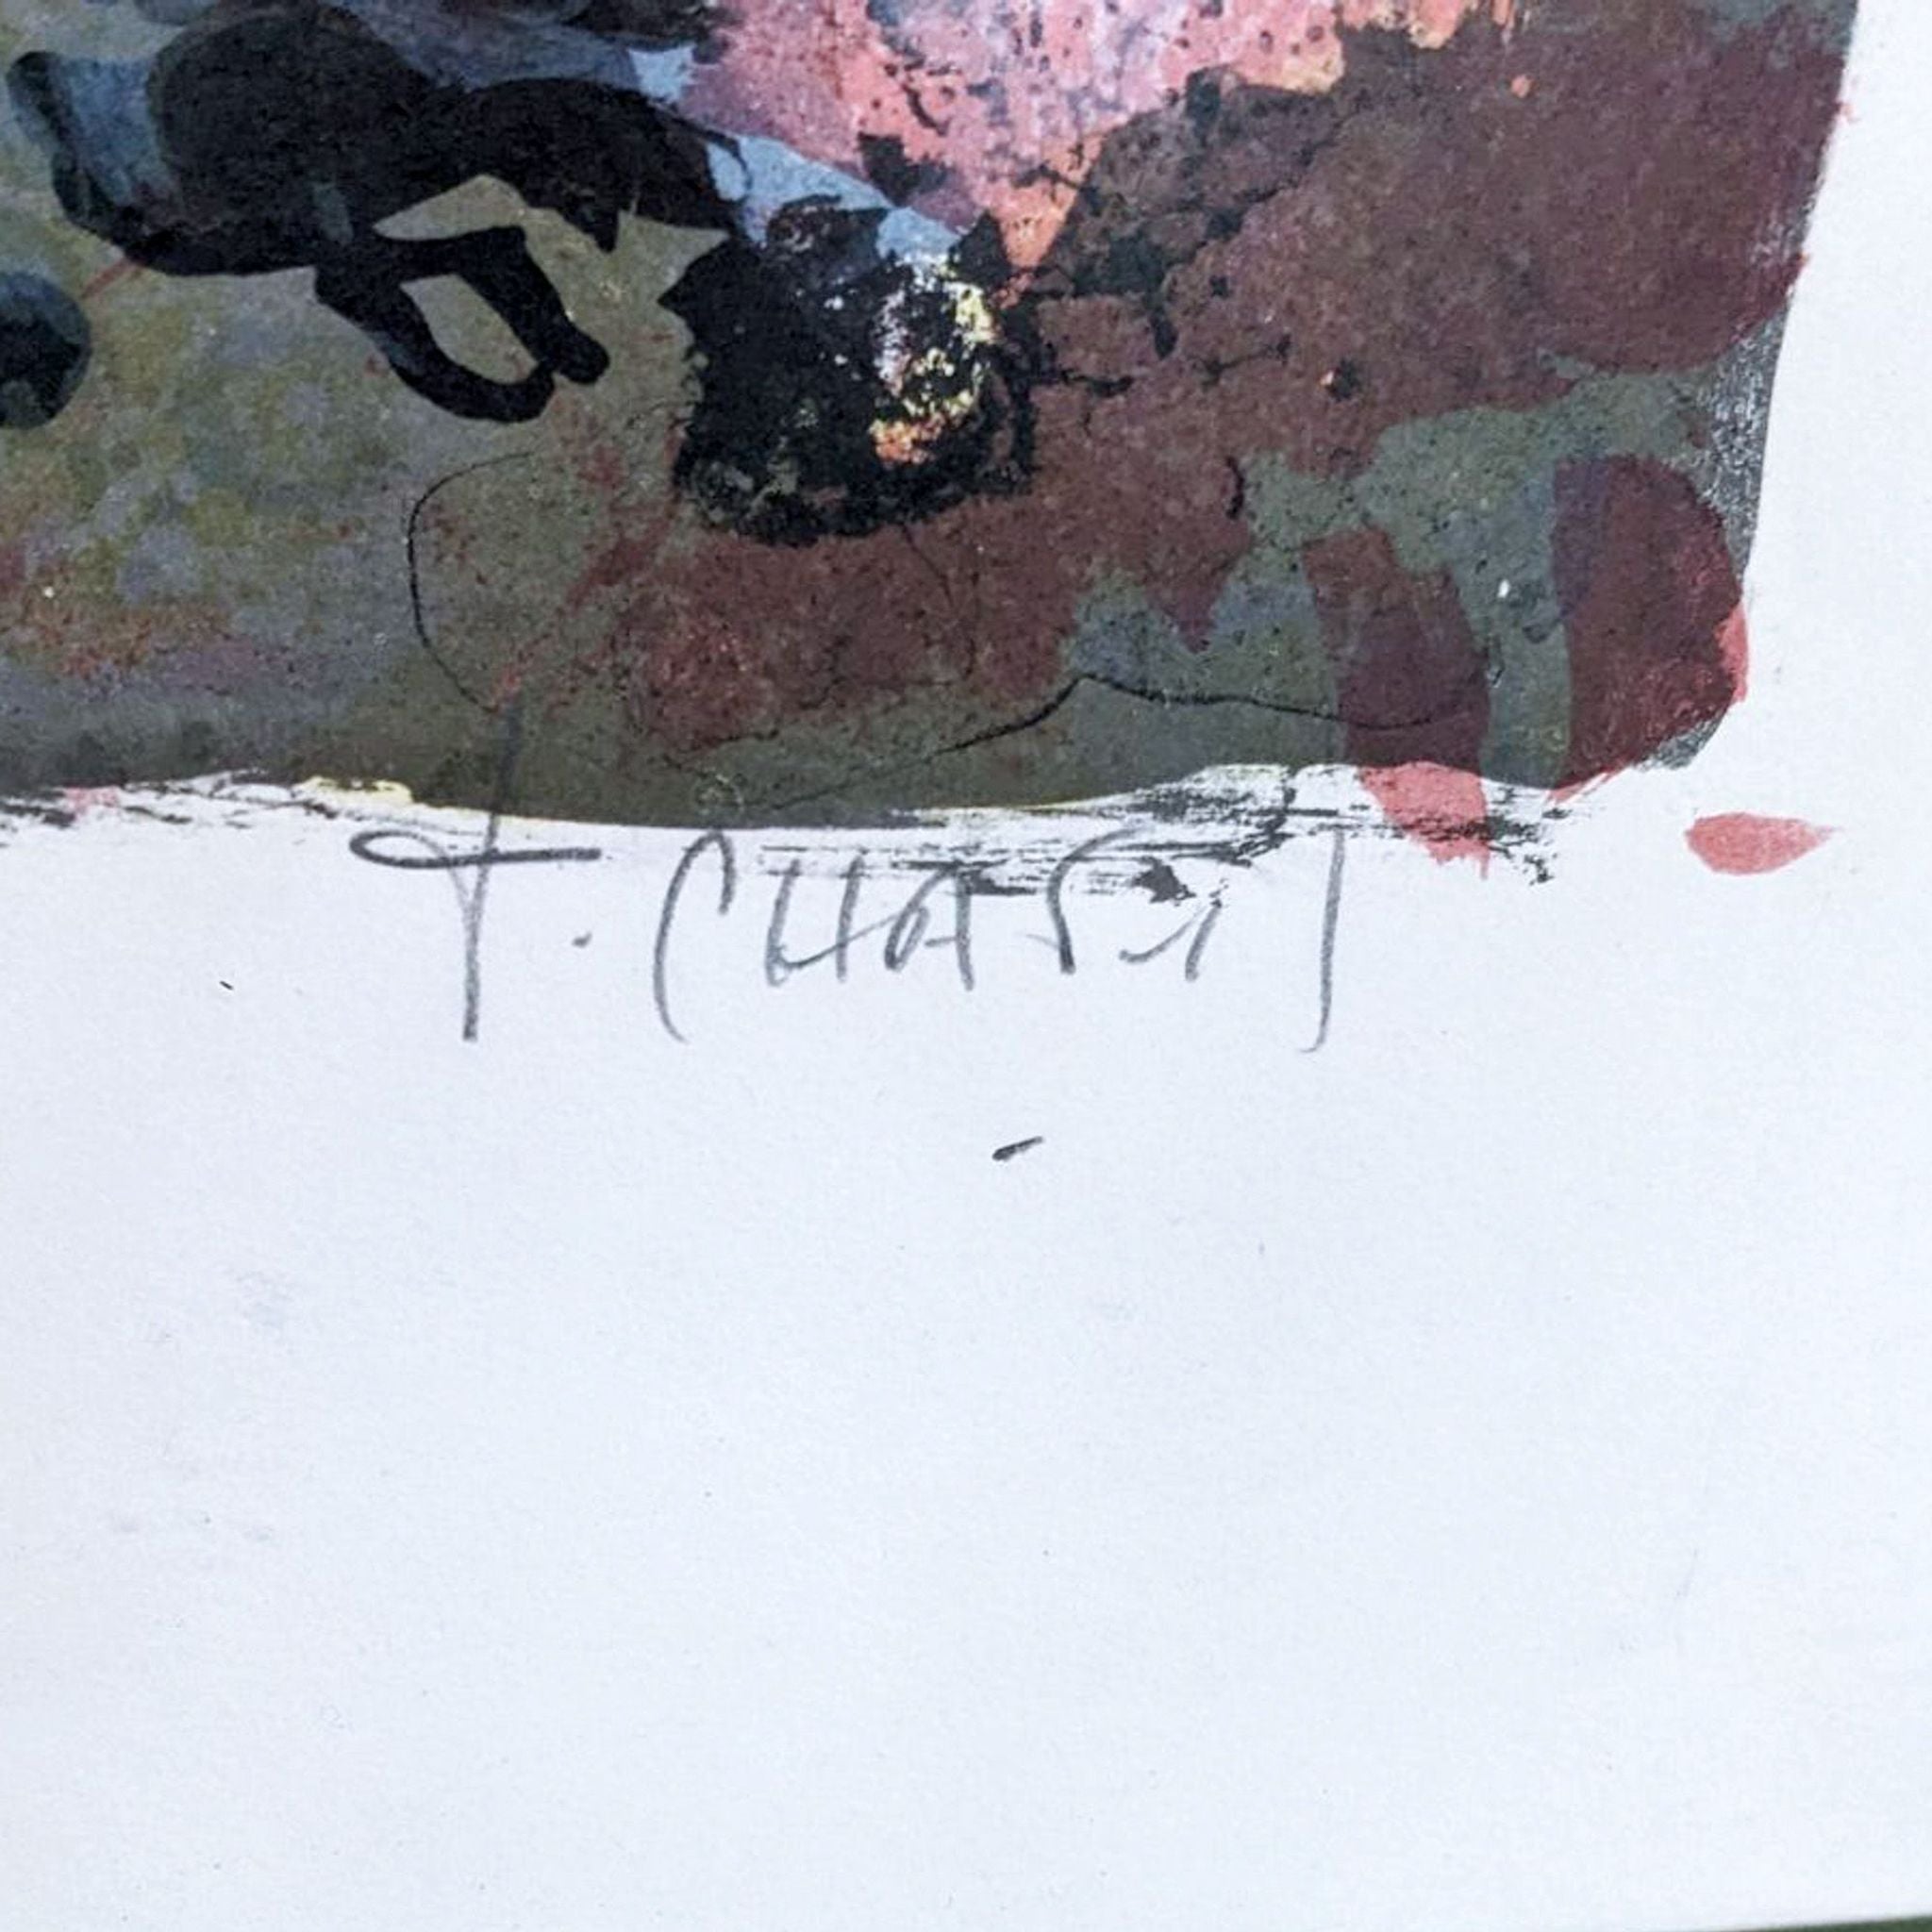 Alt text 2: Close-up of artist's signature on modern abstract artwork with round center, set against a predominantly dark background with vibrant accents.